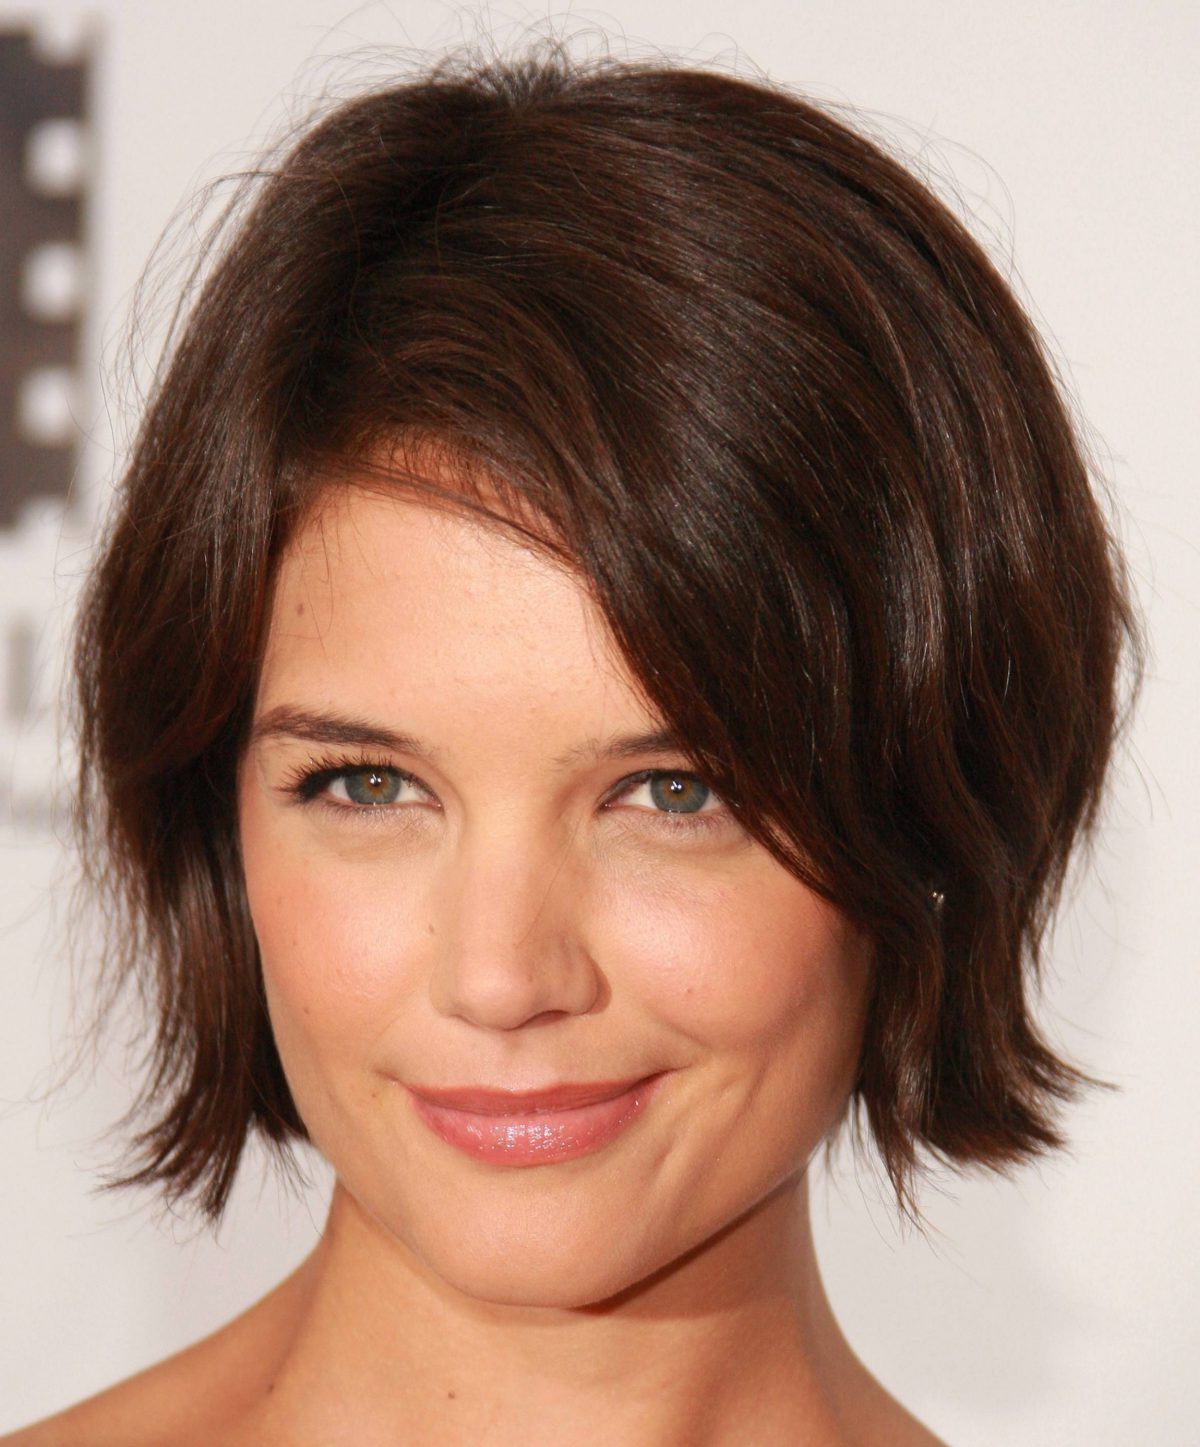 Best Short Hairstyles – Cute Hair Cut Guide For Round Face Shape Pertaining To Short Haircuts For Women With Round Face (View 7 of 25)